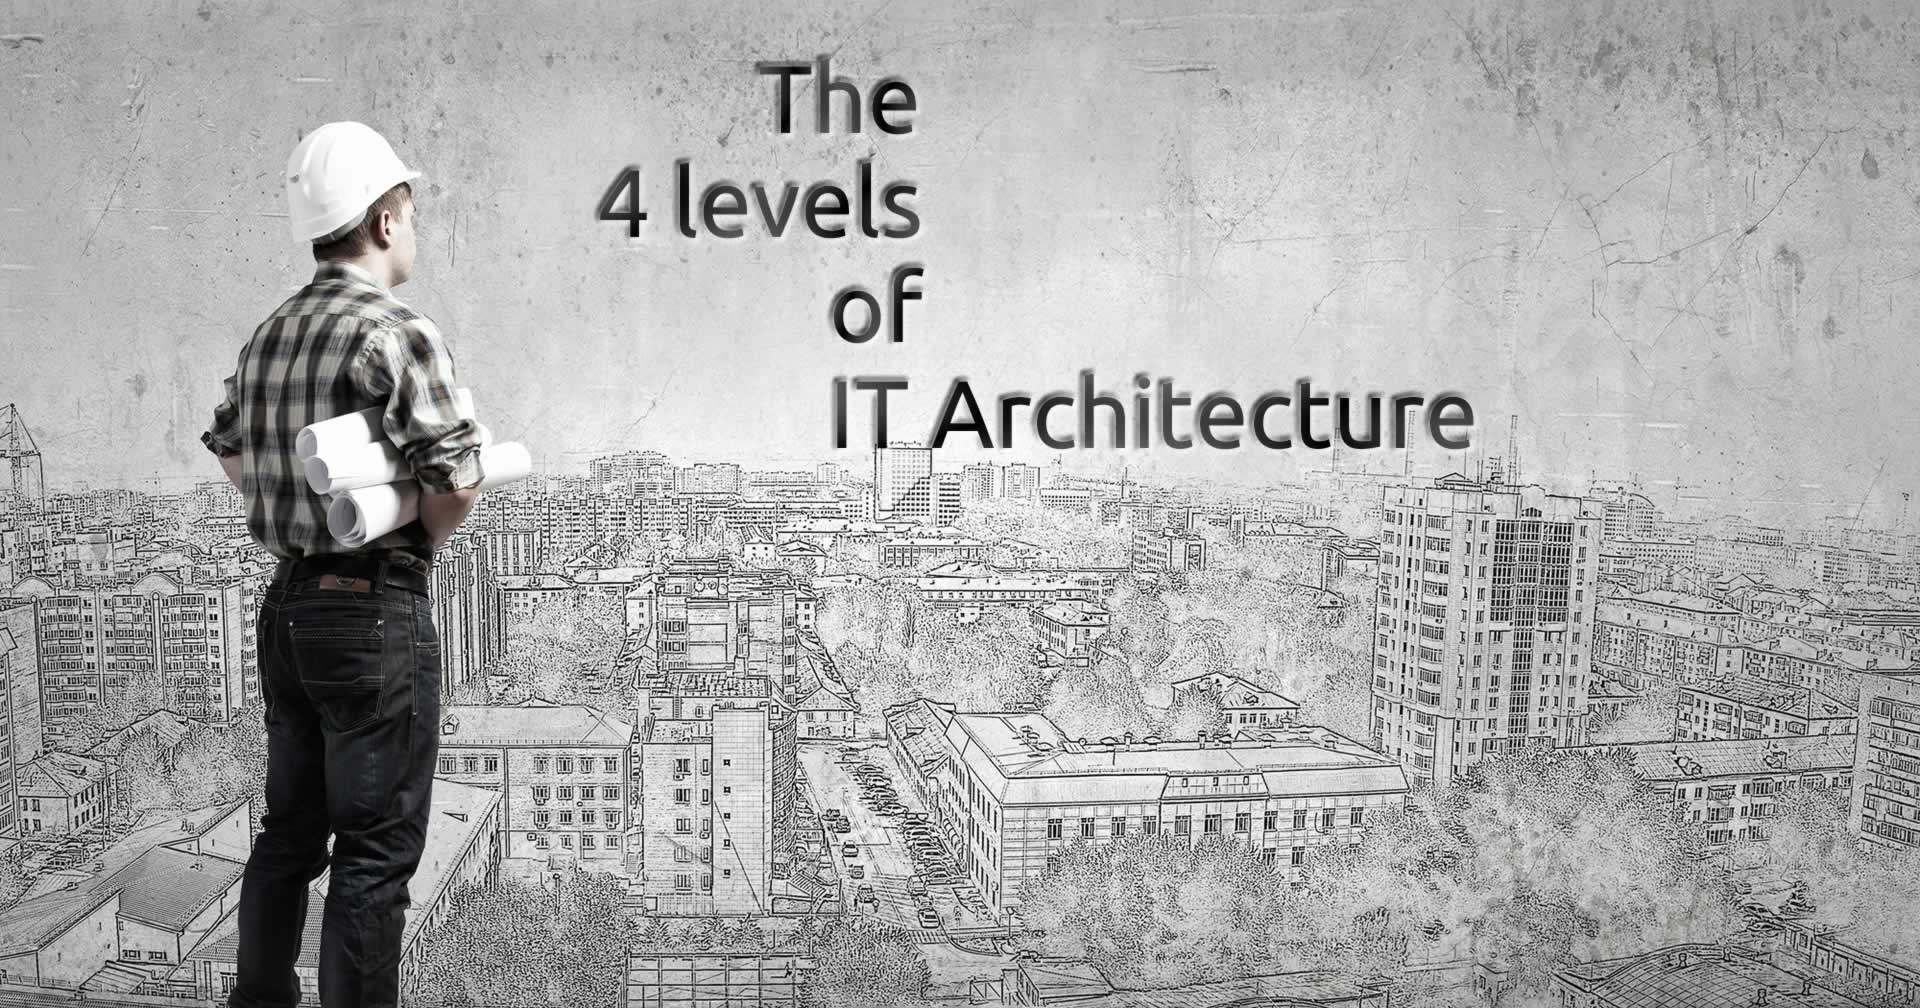 The 4 levels of IT Architecture